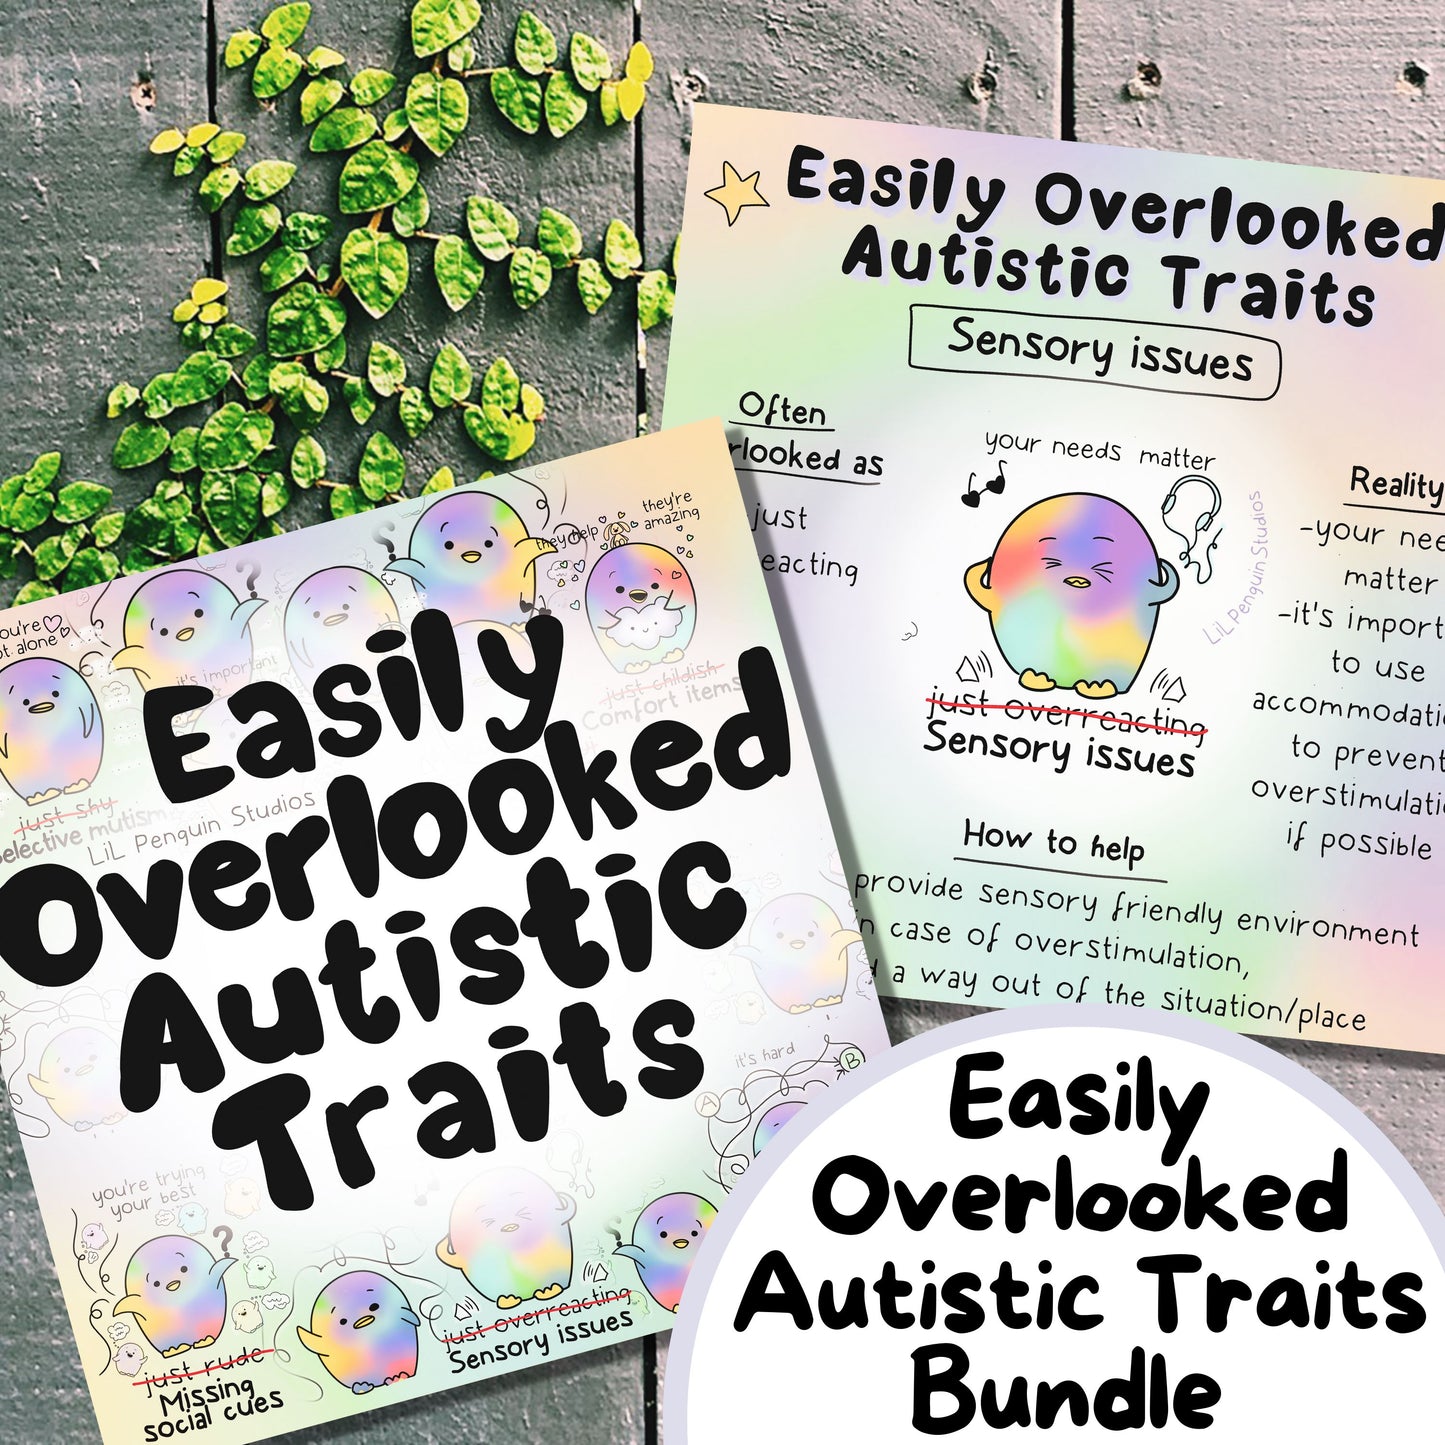 Easily Overlooked Autistic Traits Printable Bundle hand drawn by an autistic artist (LiL penguin Studios). This image shows two prints: the ttitle page and an artwork about sensory issues.